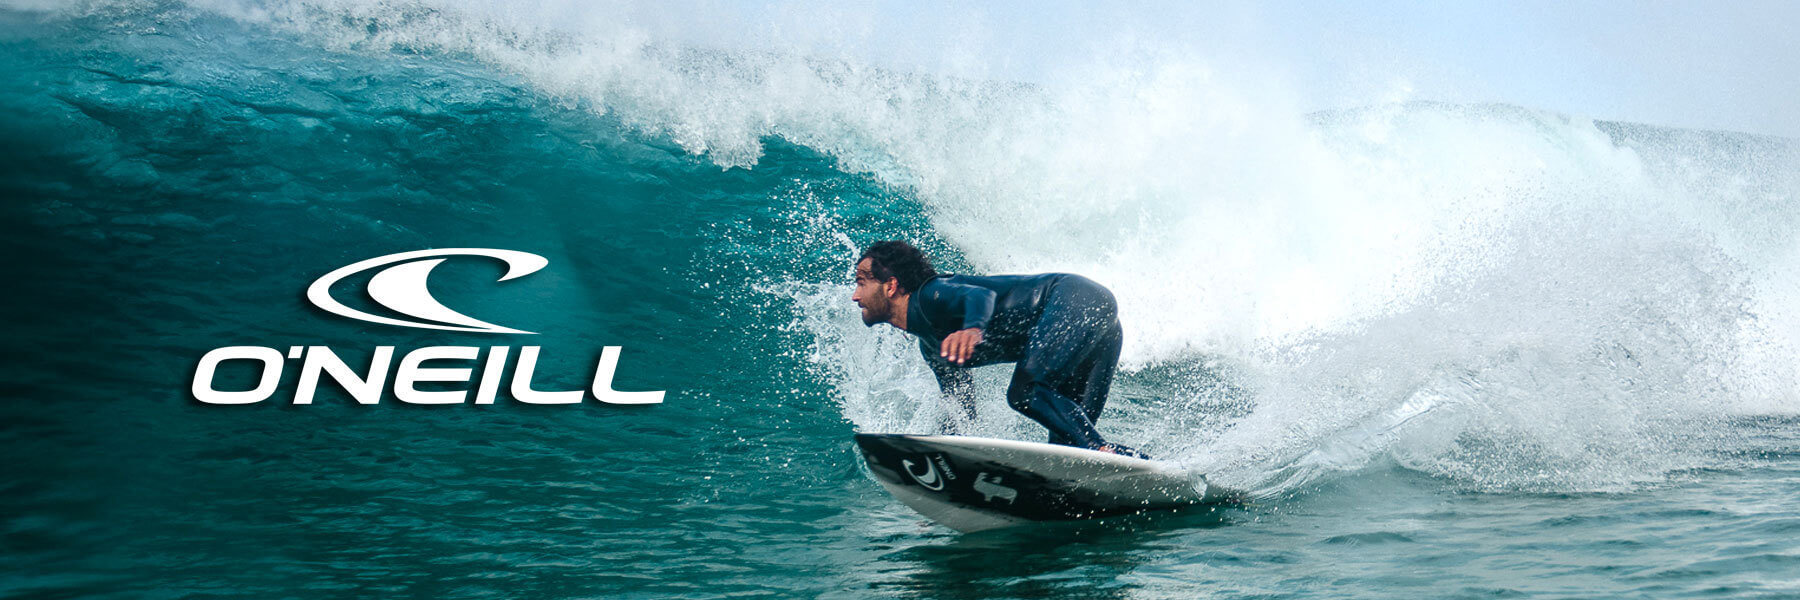 o'neill wetsuits